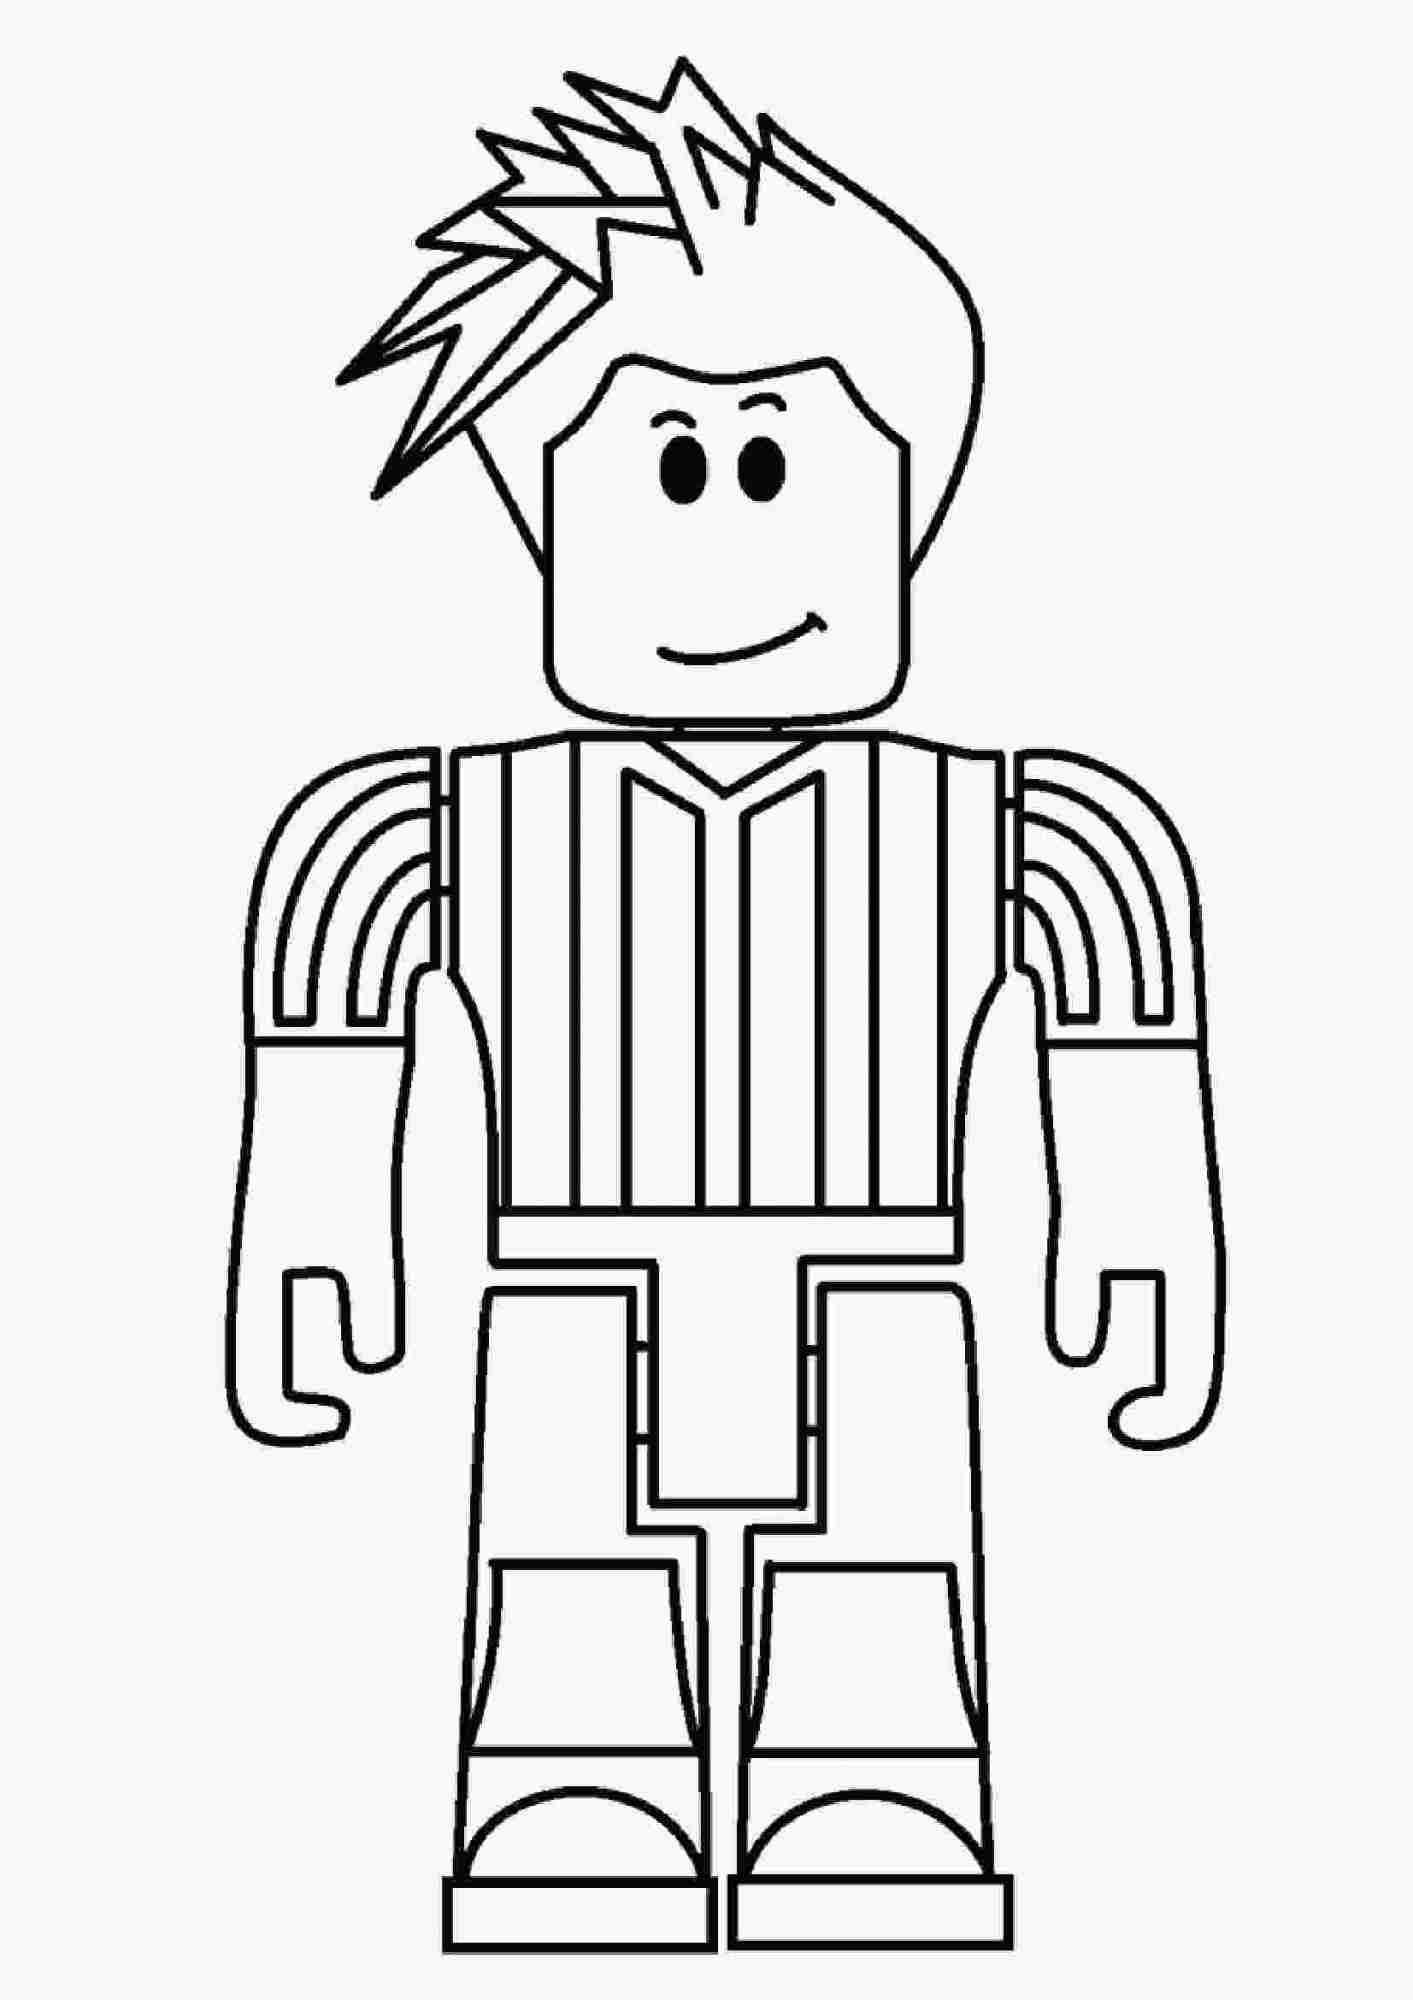 Robloxian boy wears sport shirt Coloring Pages